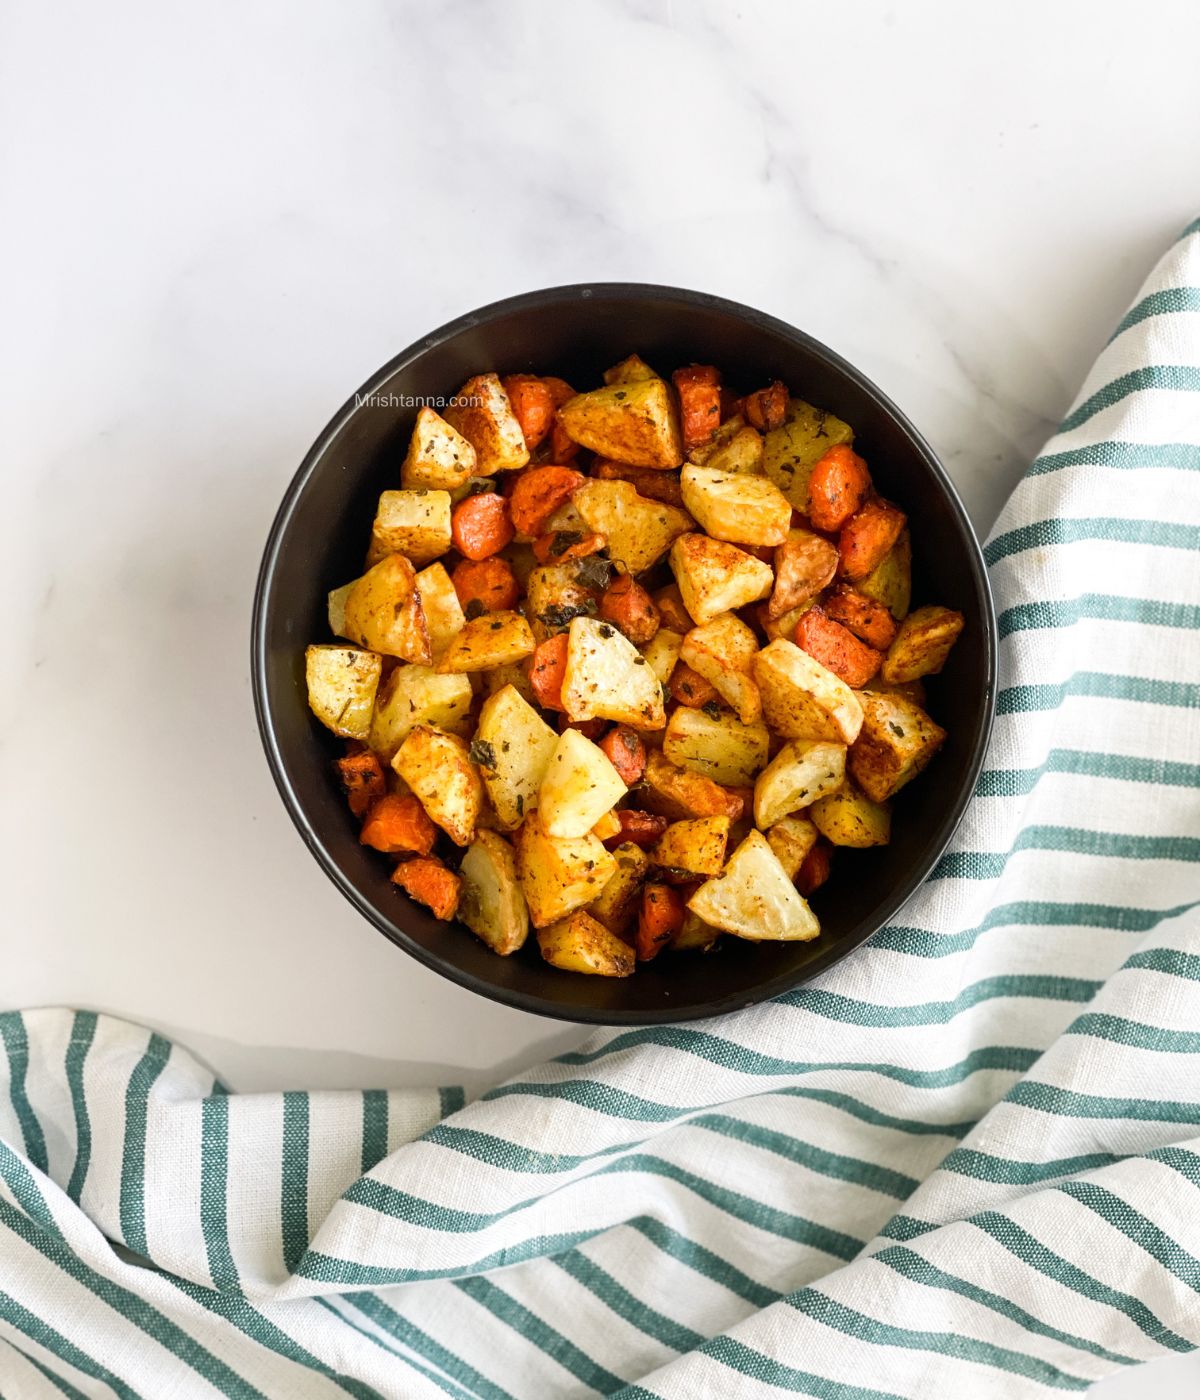 A bowl of air fryer roasted carrots and potatoes on the table.